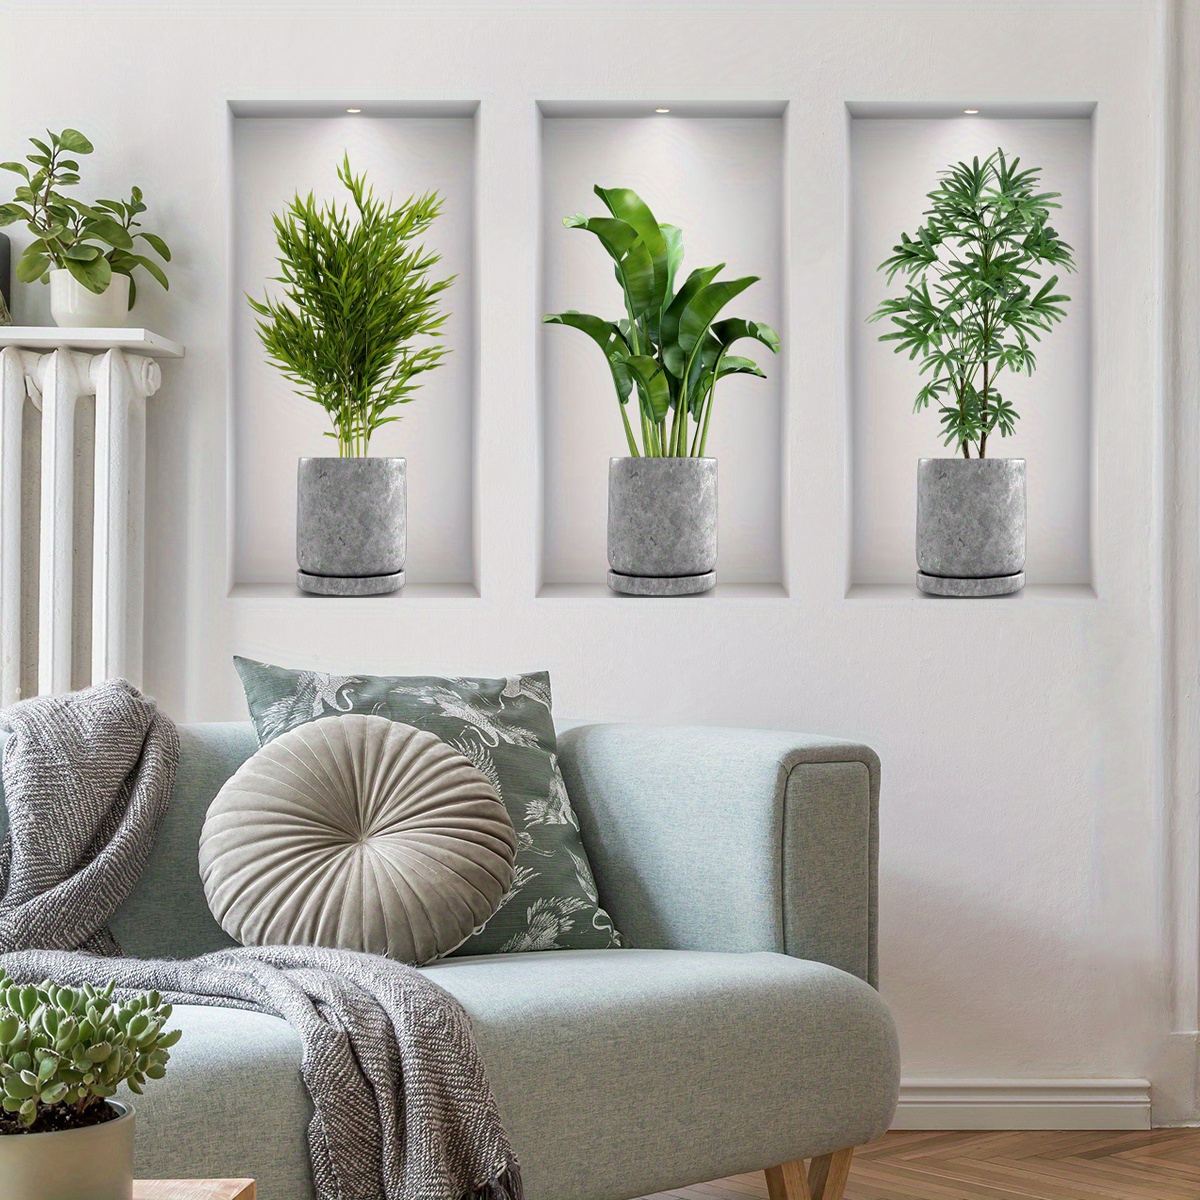 

1 Set Of 3 Green Plant Potted Simulation Flower Wall Stickers, Perfect For Decorating The Walls In The Bedroom, Living Room, Or Entrance. A Perfect Gift.